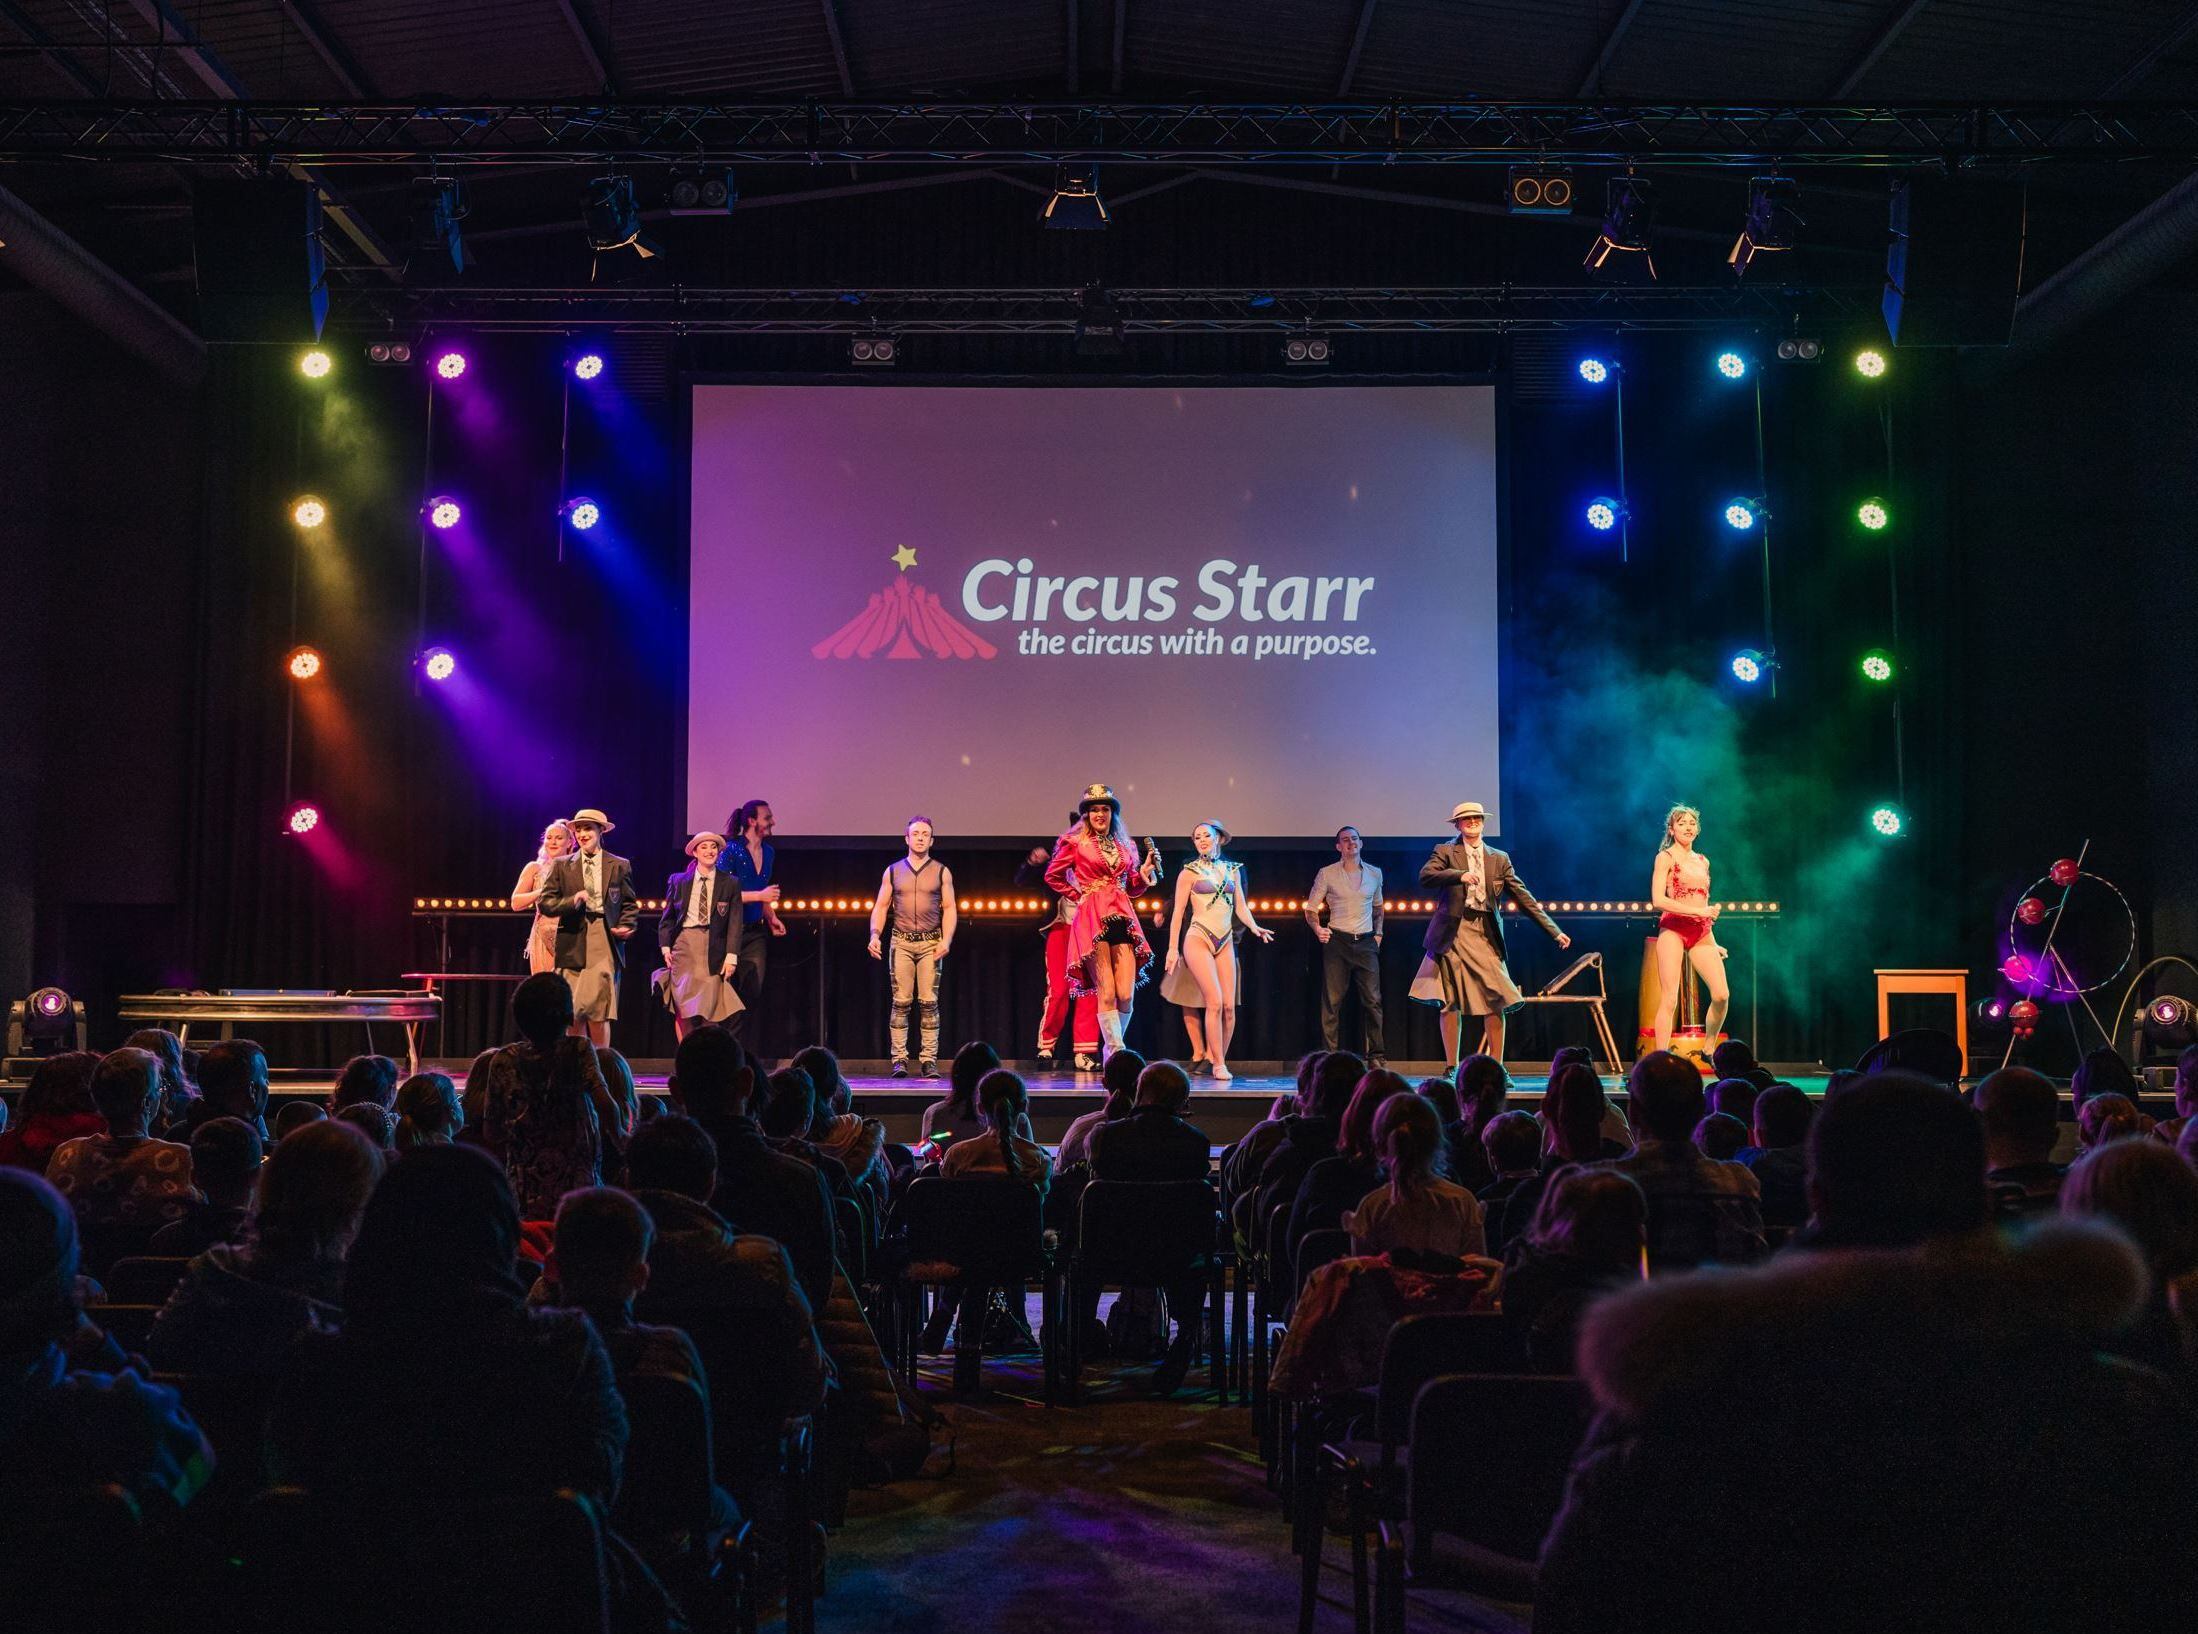 The 'circus with a purpose' all set for their inclusive show